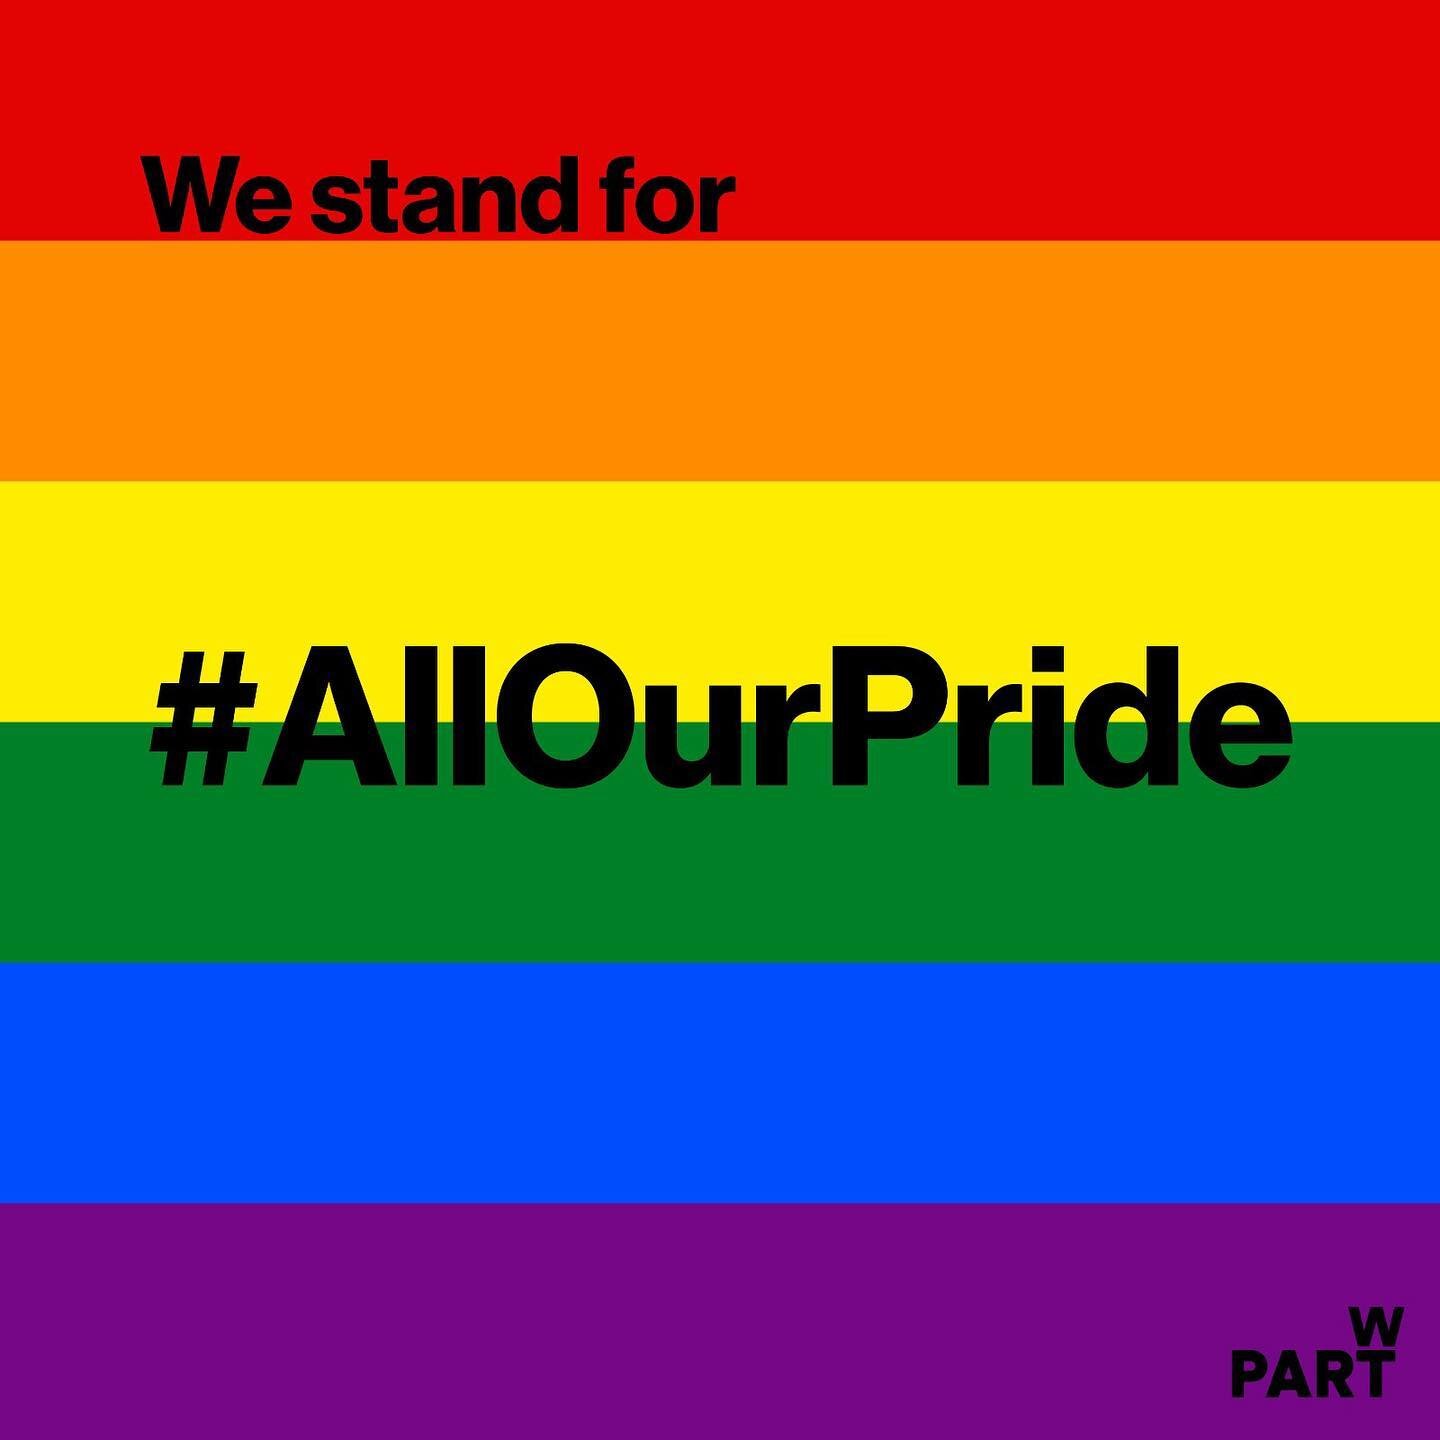 Happy Pride!

#AllOurPride commemorates the 50th anniversary of the original pride March in the UK. To celebrate pride month we&rsquo;re sharing @Stonewall&rsquo;s research and resources on creating inclusive workspaces and supporting their call to #